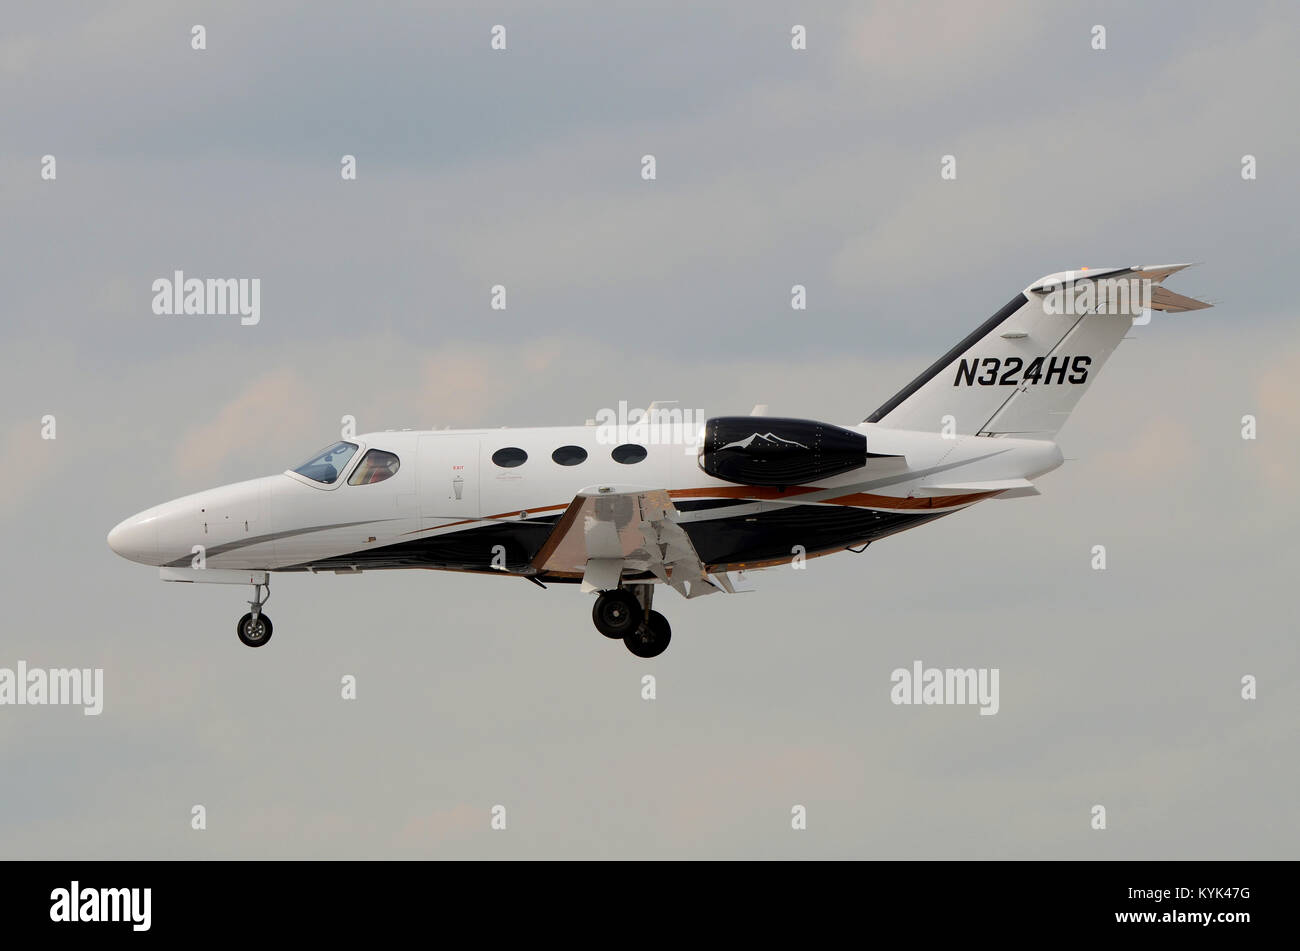 Cessna 510 Citation Mustang N324HS High Sierra edition on approach to land. Executive jet plane landing Stock Photo